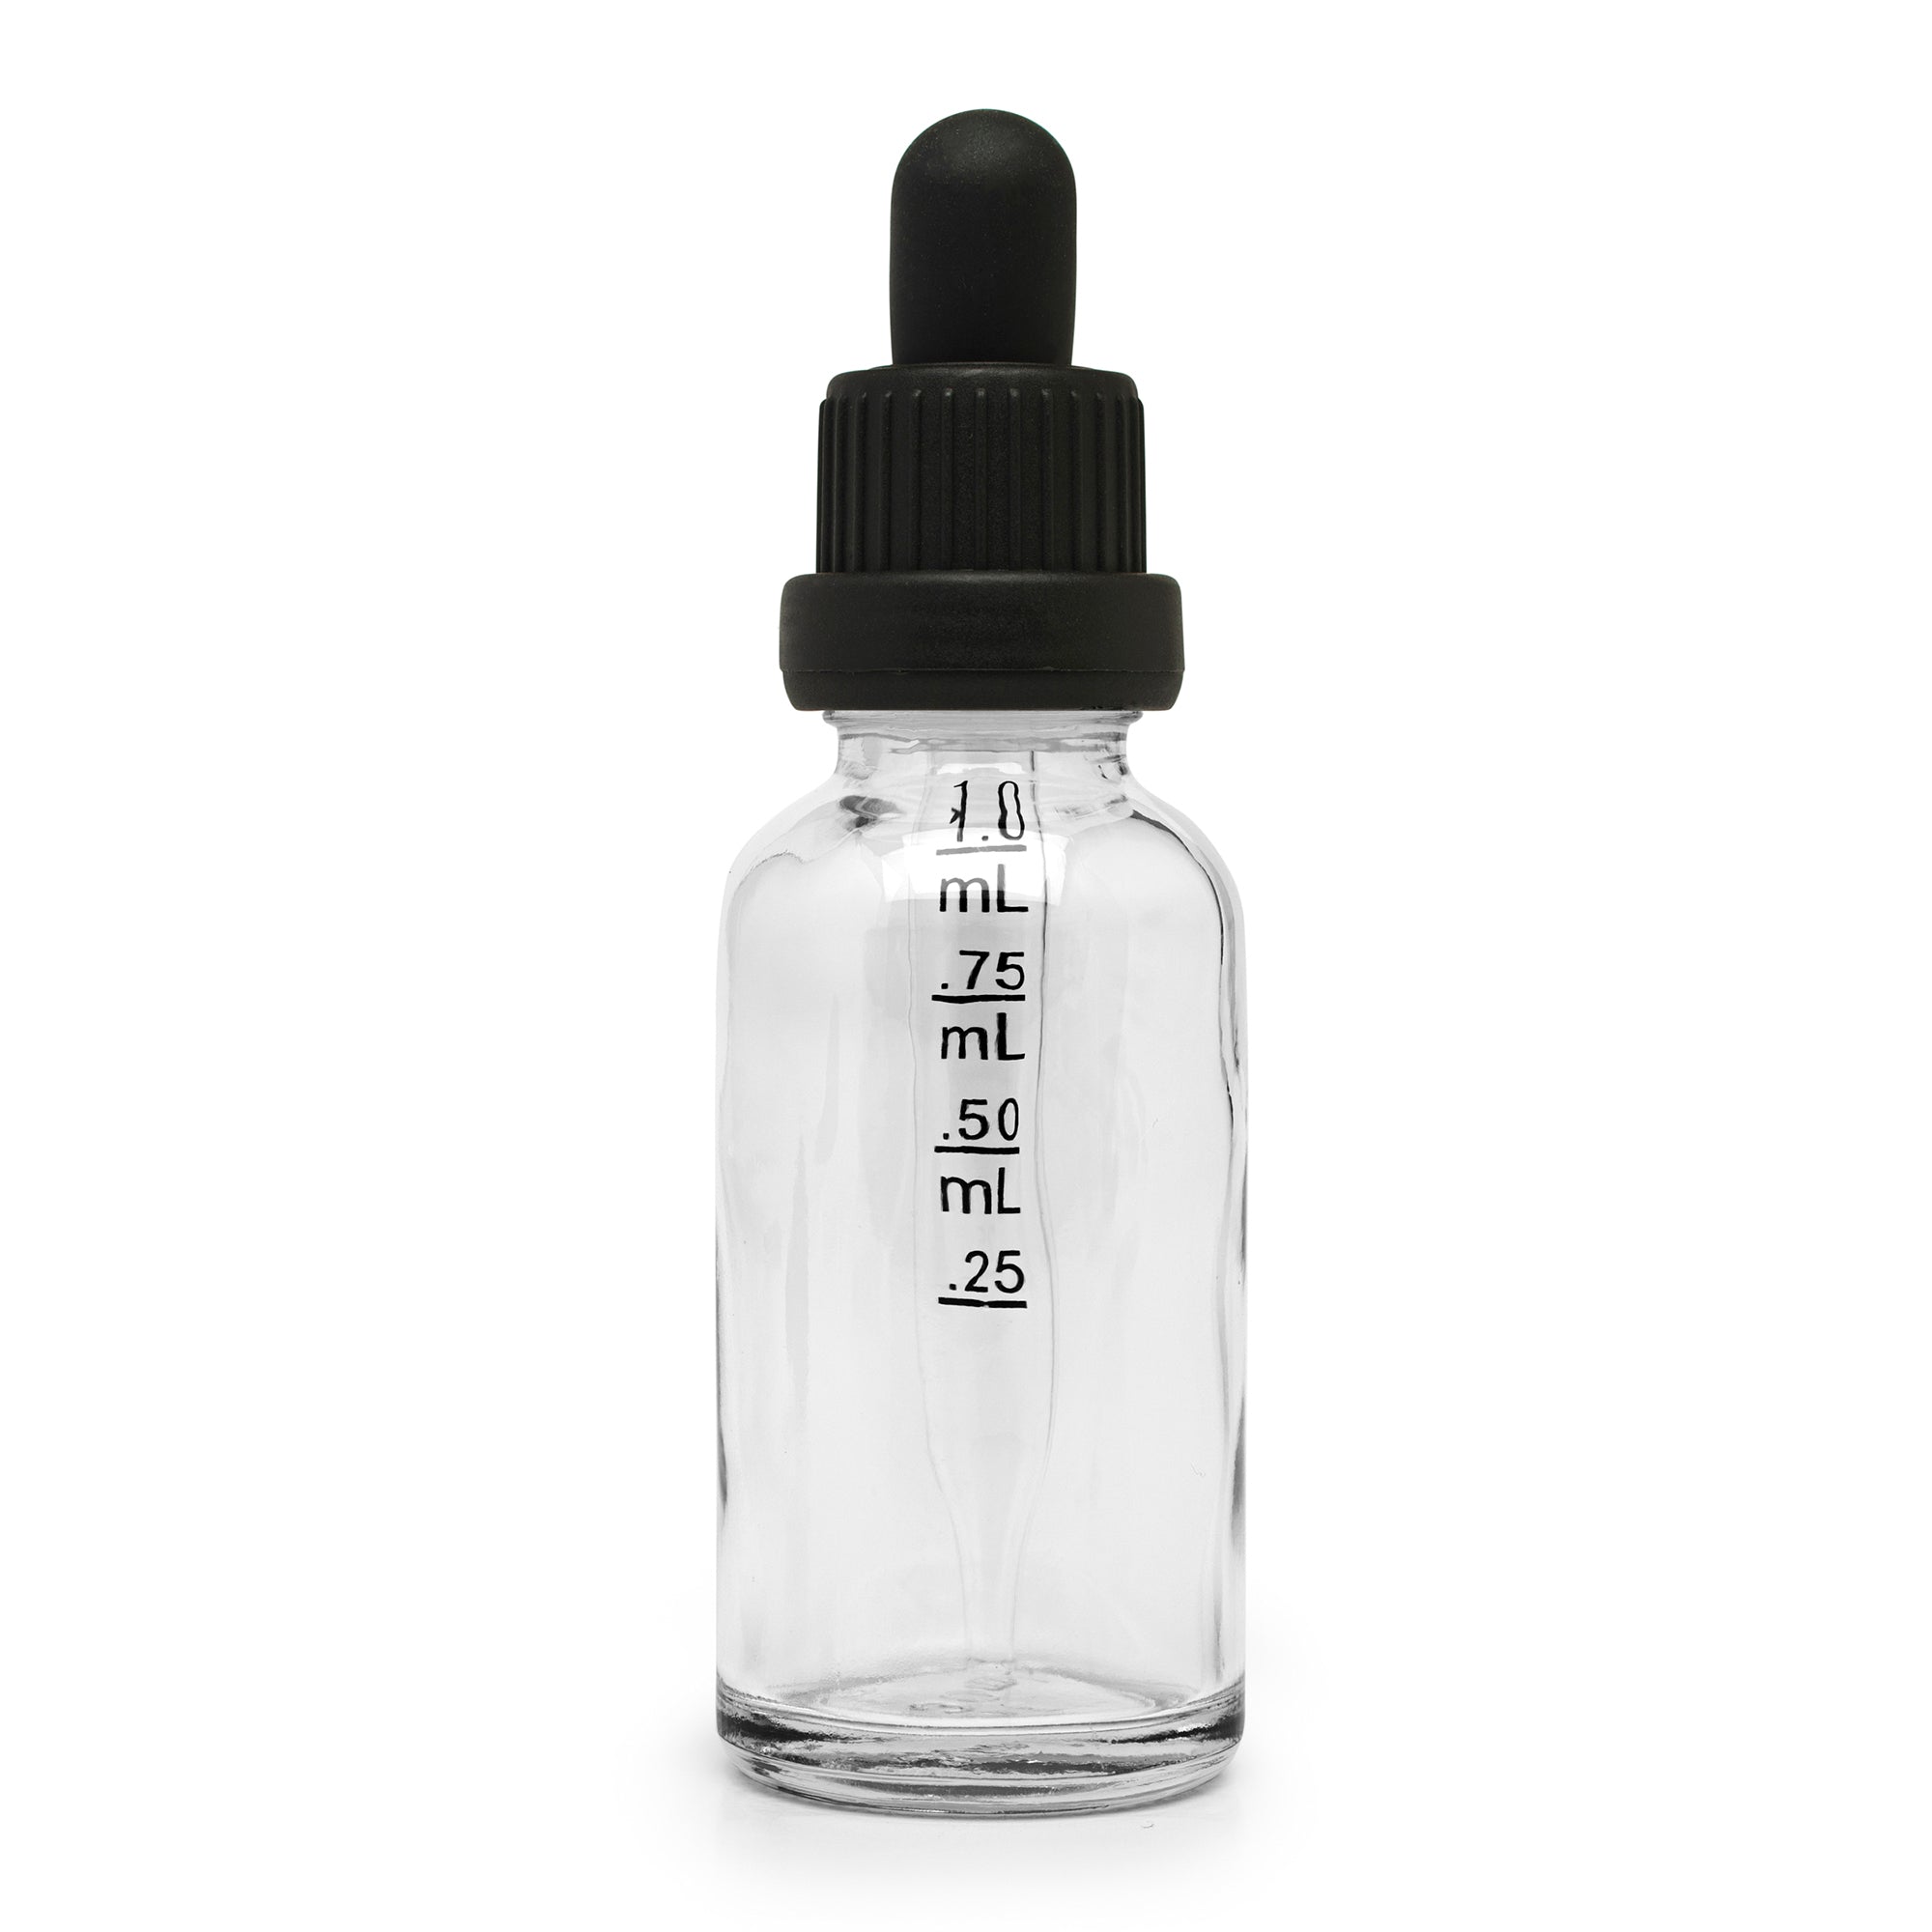 30ml glass bottle with dropper